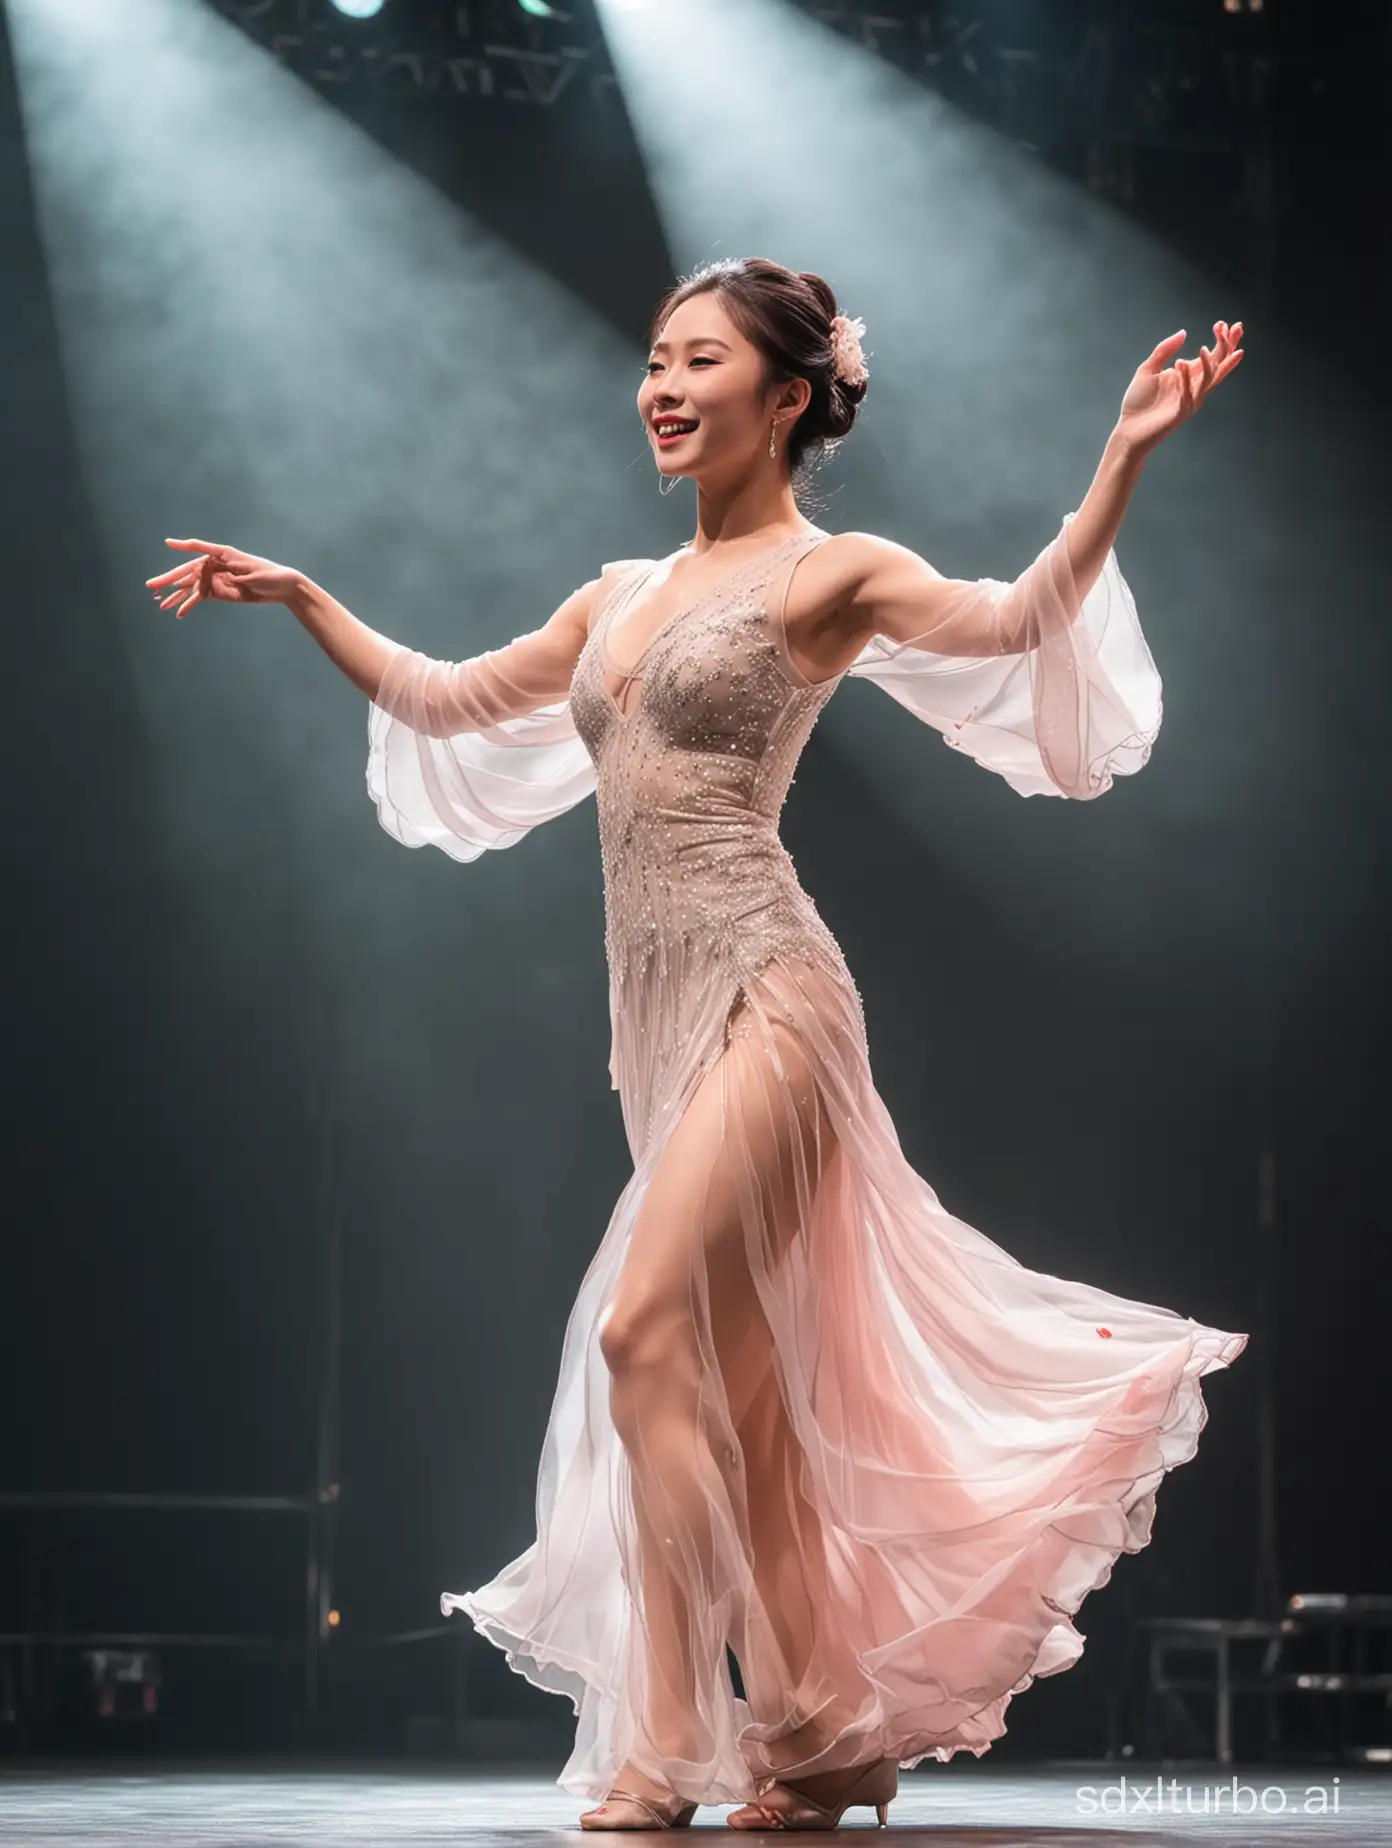 A beautiful Chinese woman dances passionately on the stage.